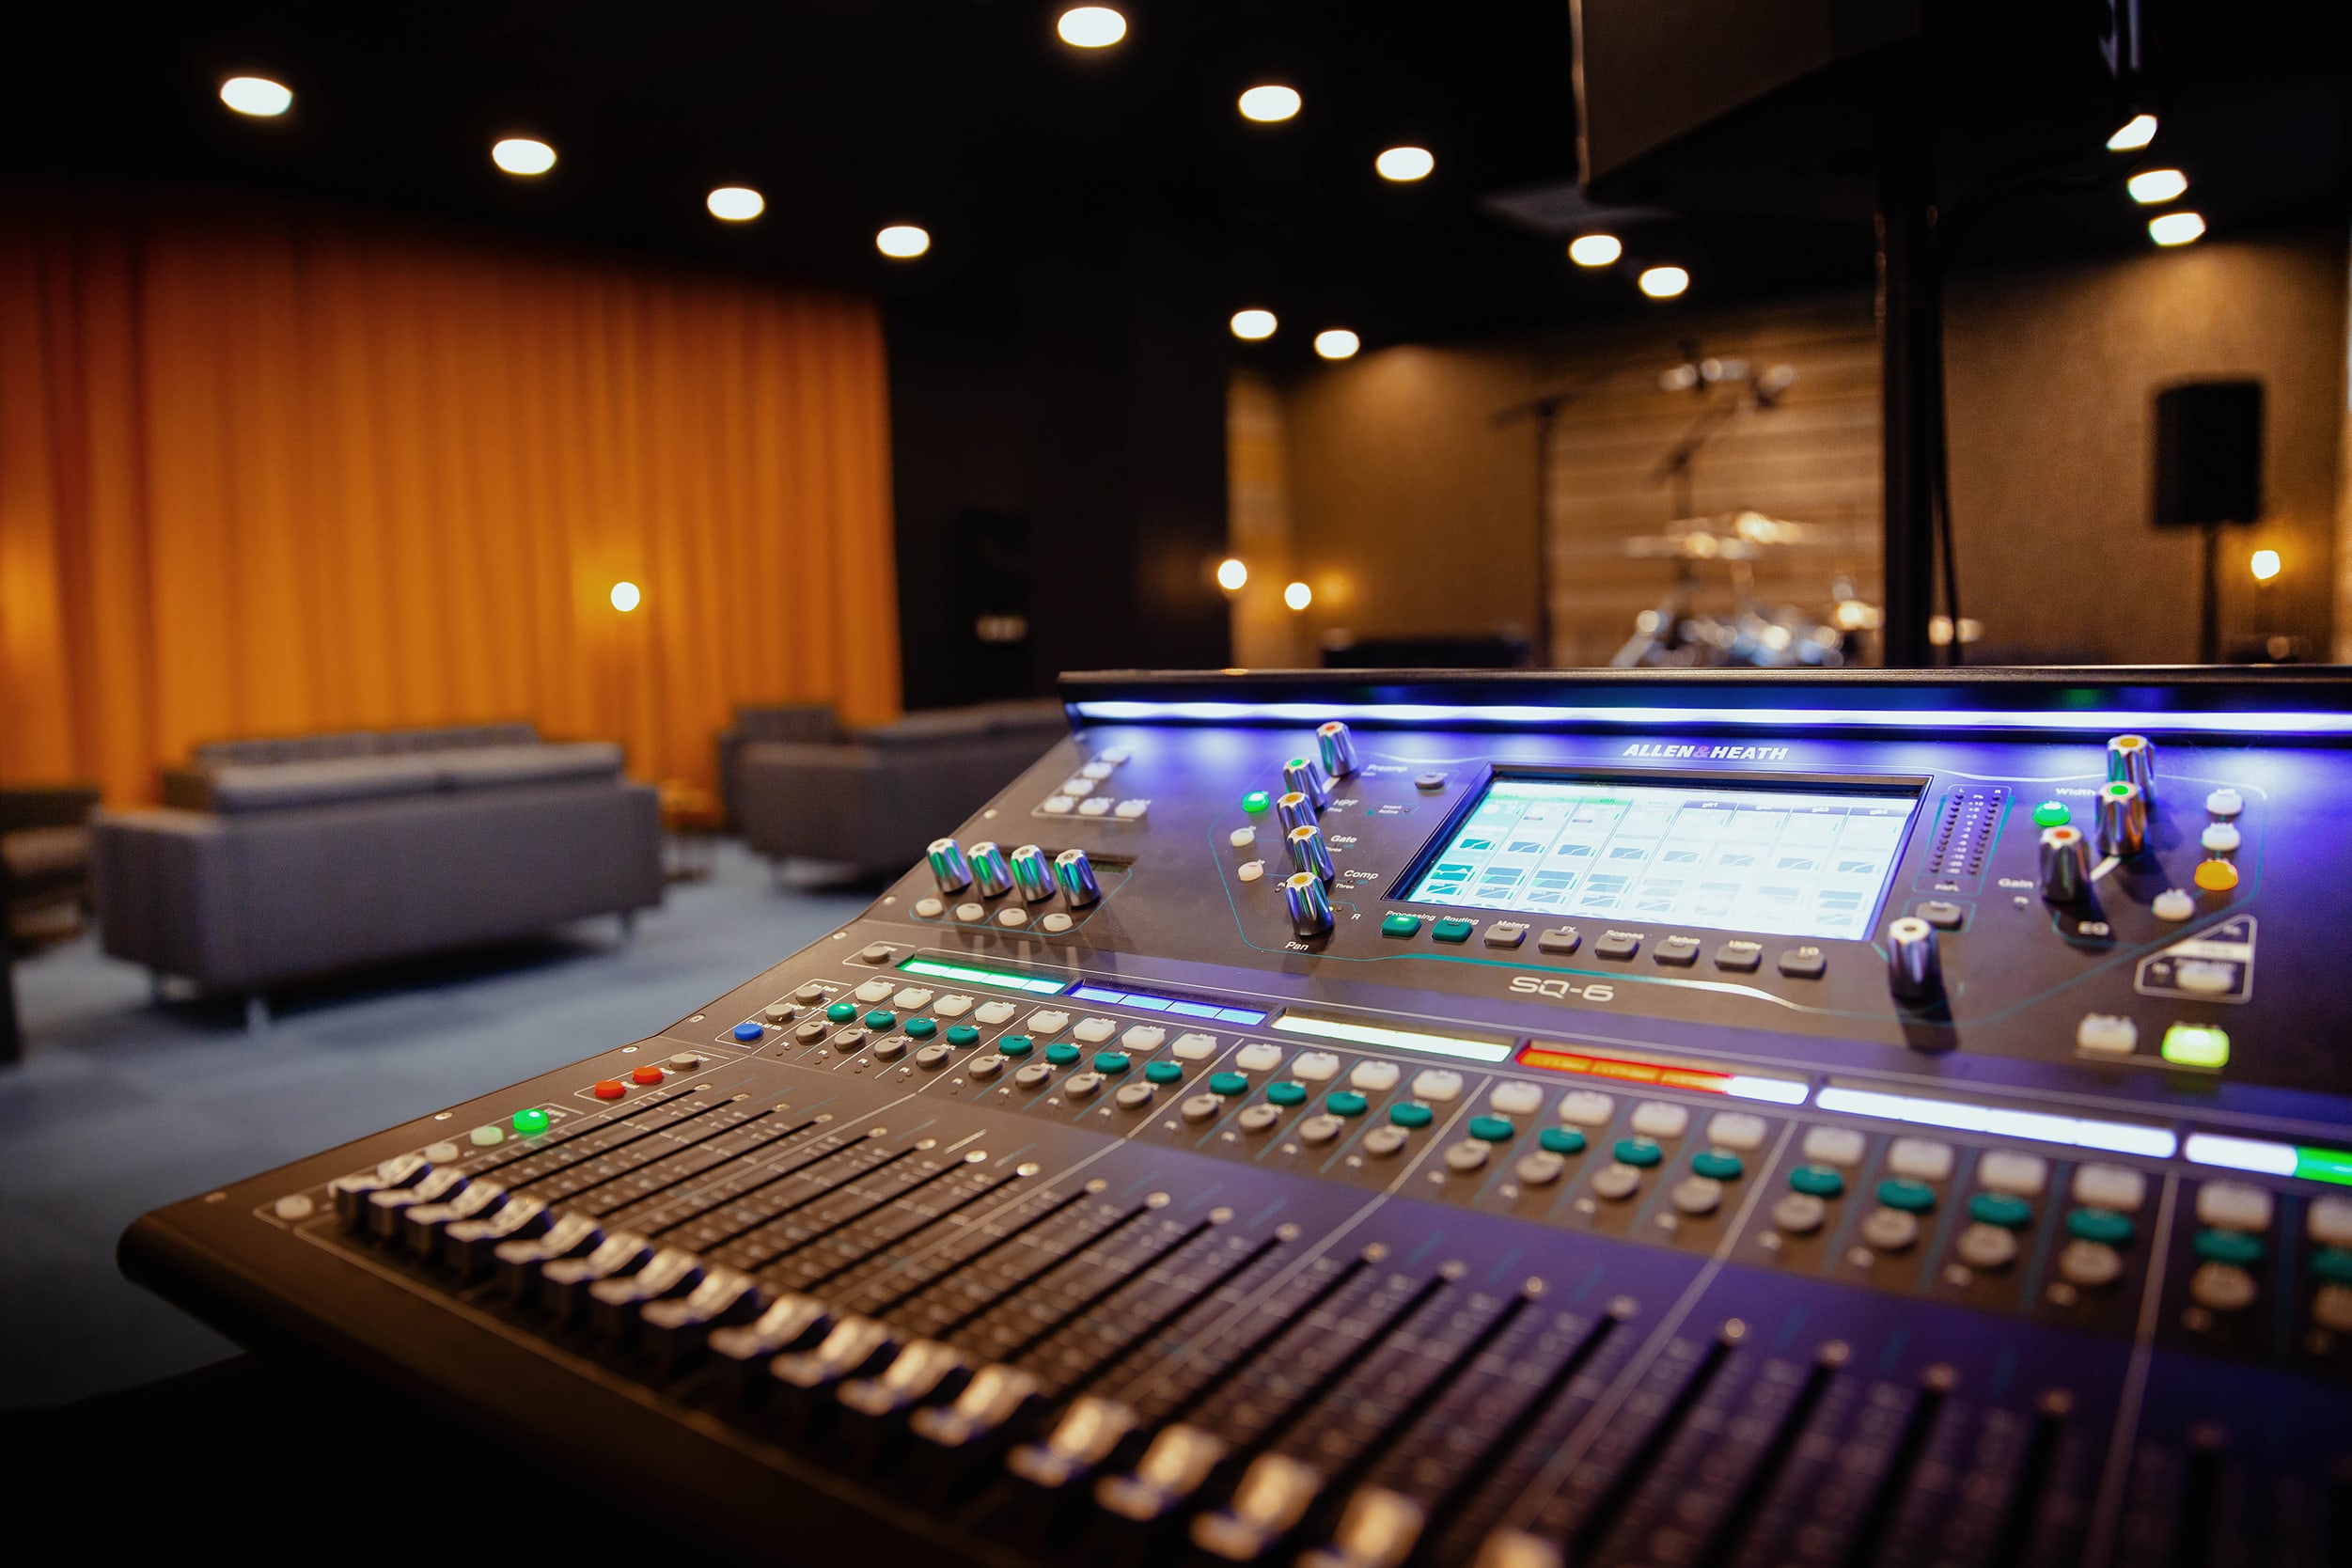 Allen & Heath Is The Primary Choice For Brand New High-End Rehearsal Studios Near Brussels 1